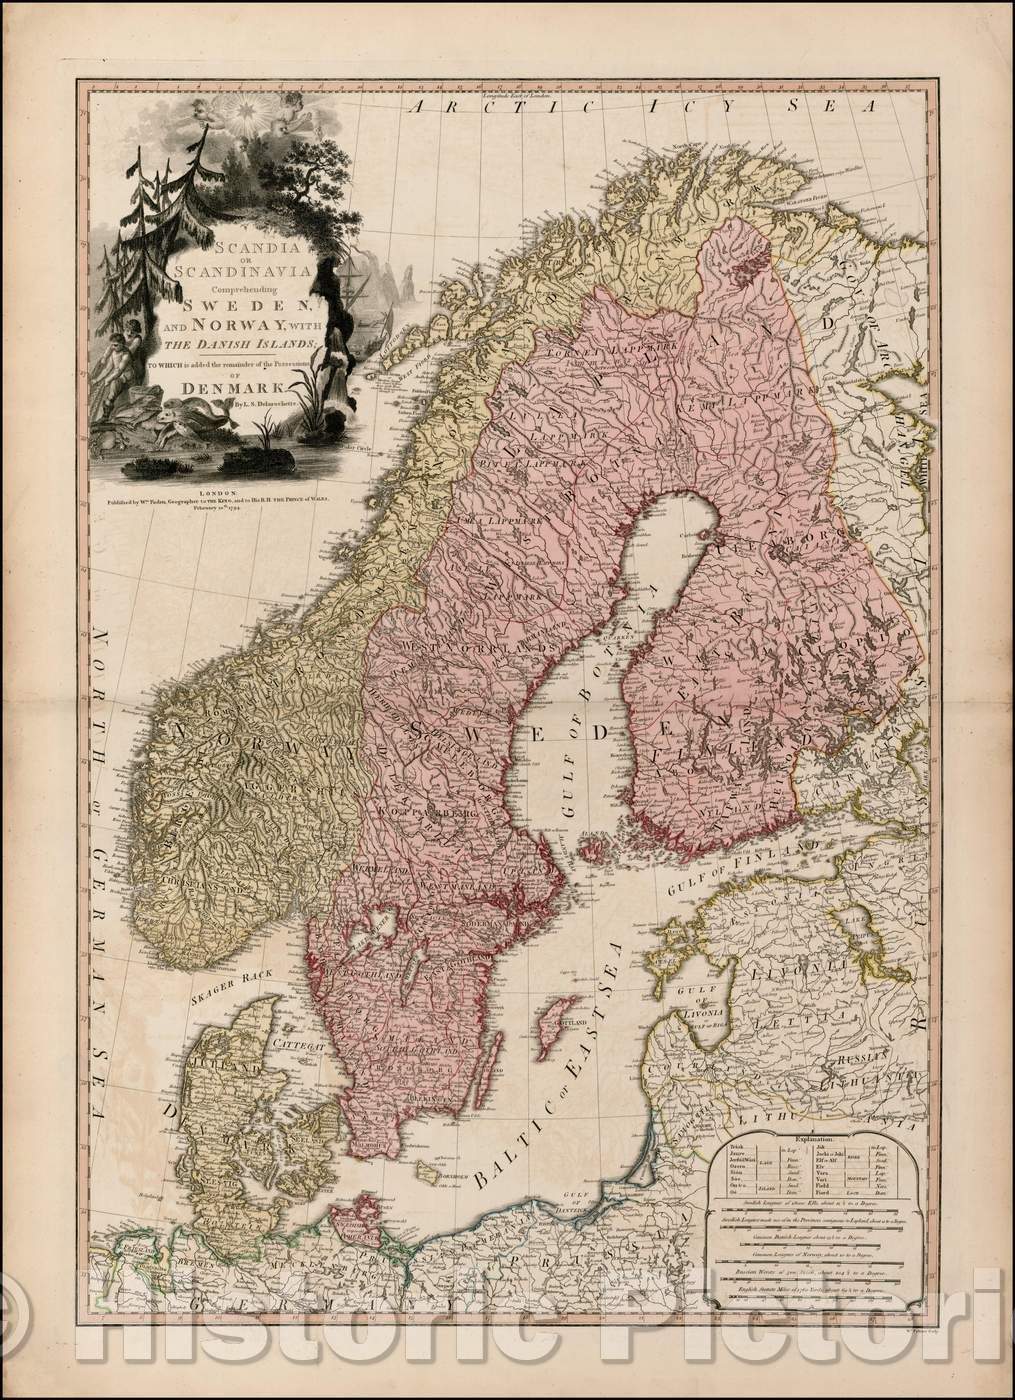 Historic Map - Scandia or Scandinavia Comprehending Sweden, and Norway, with The Danish Islands, 1794 - Vintage Wall Art